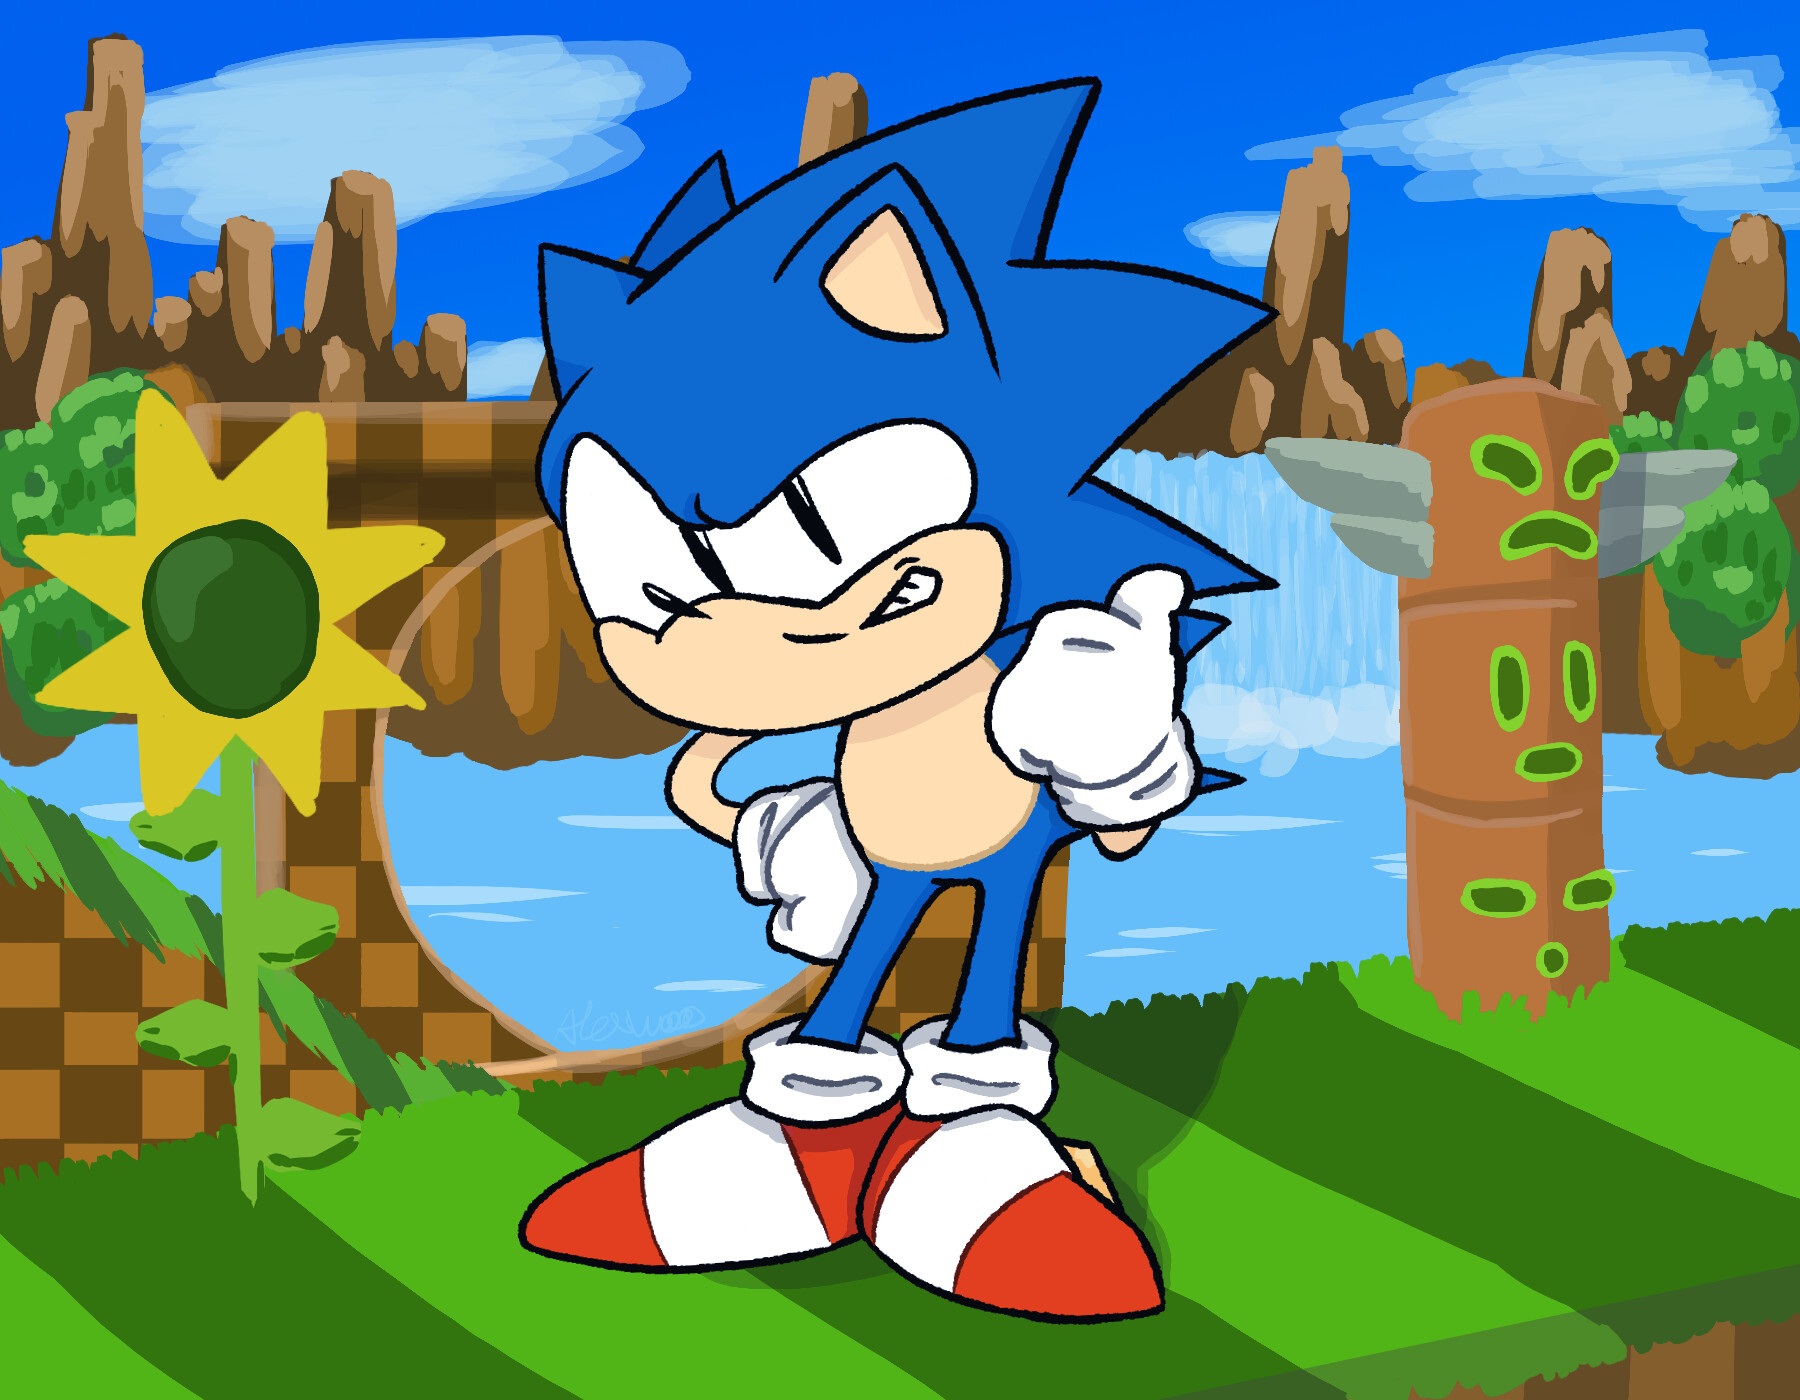 Sonic 1 (2013) - Green Hill Zone - News - Gallery - Sonic SCANF